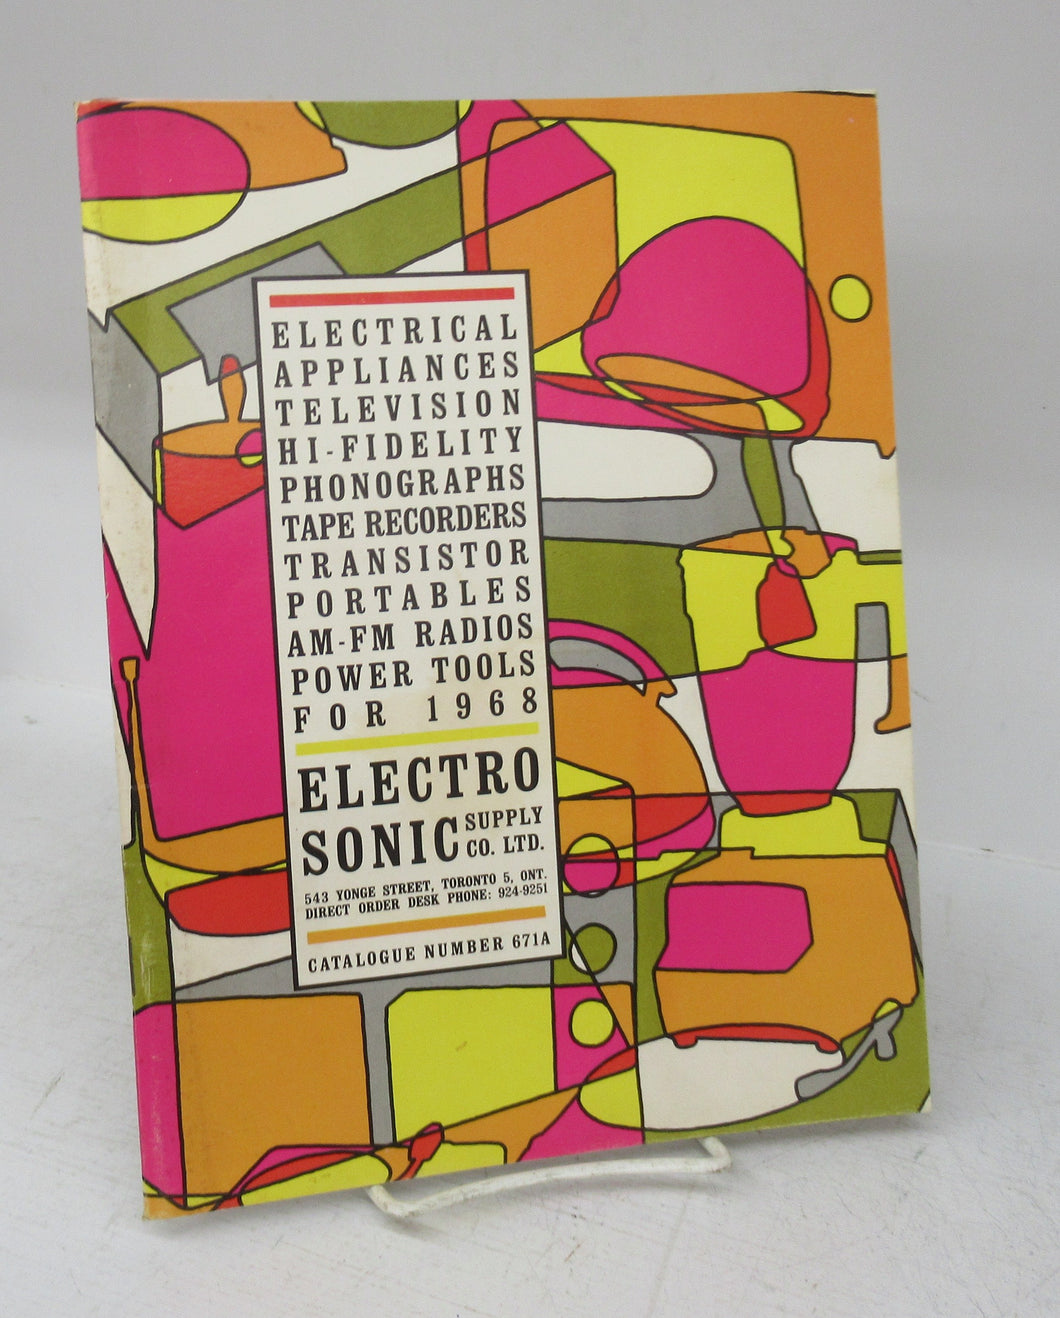 Electrosonic catalogue for 1968